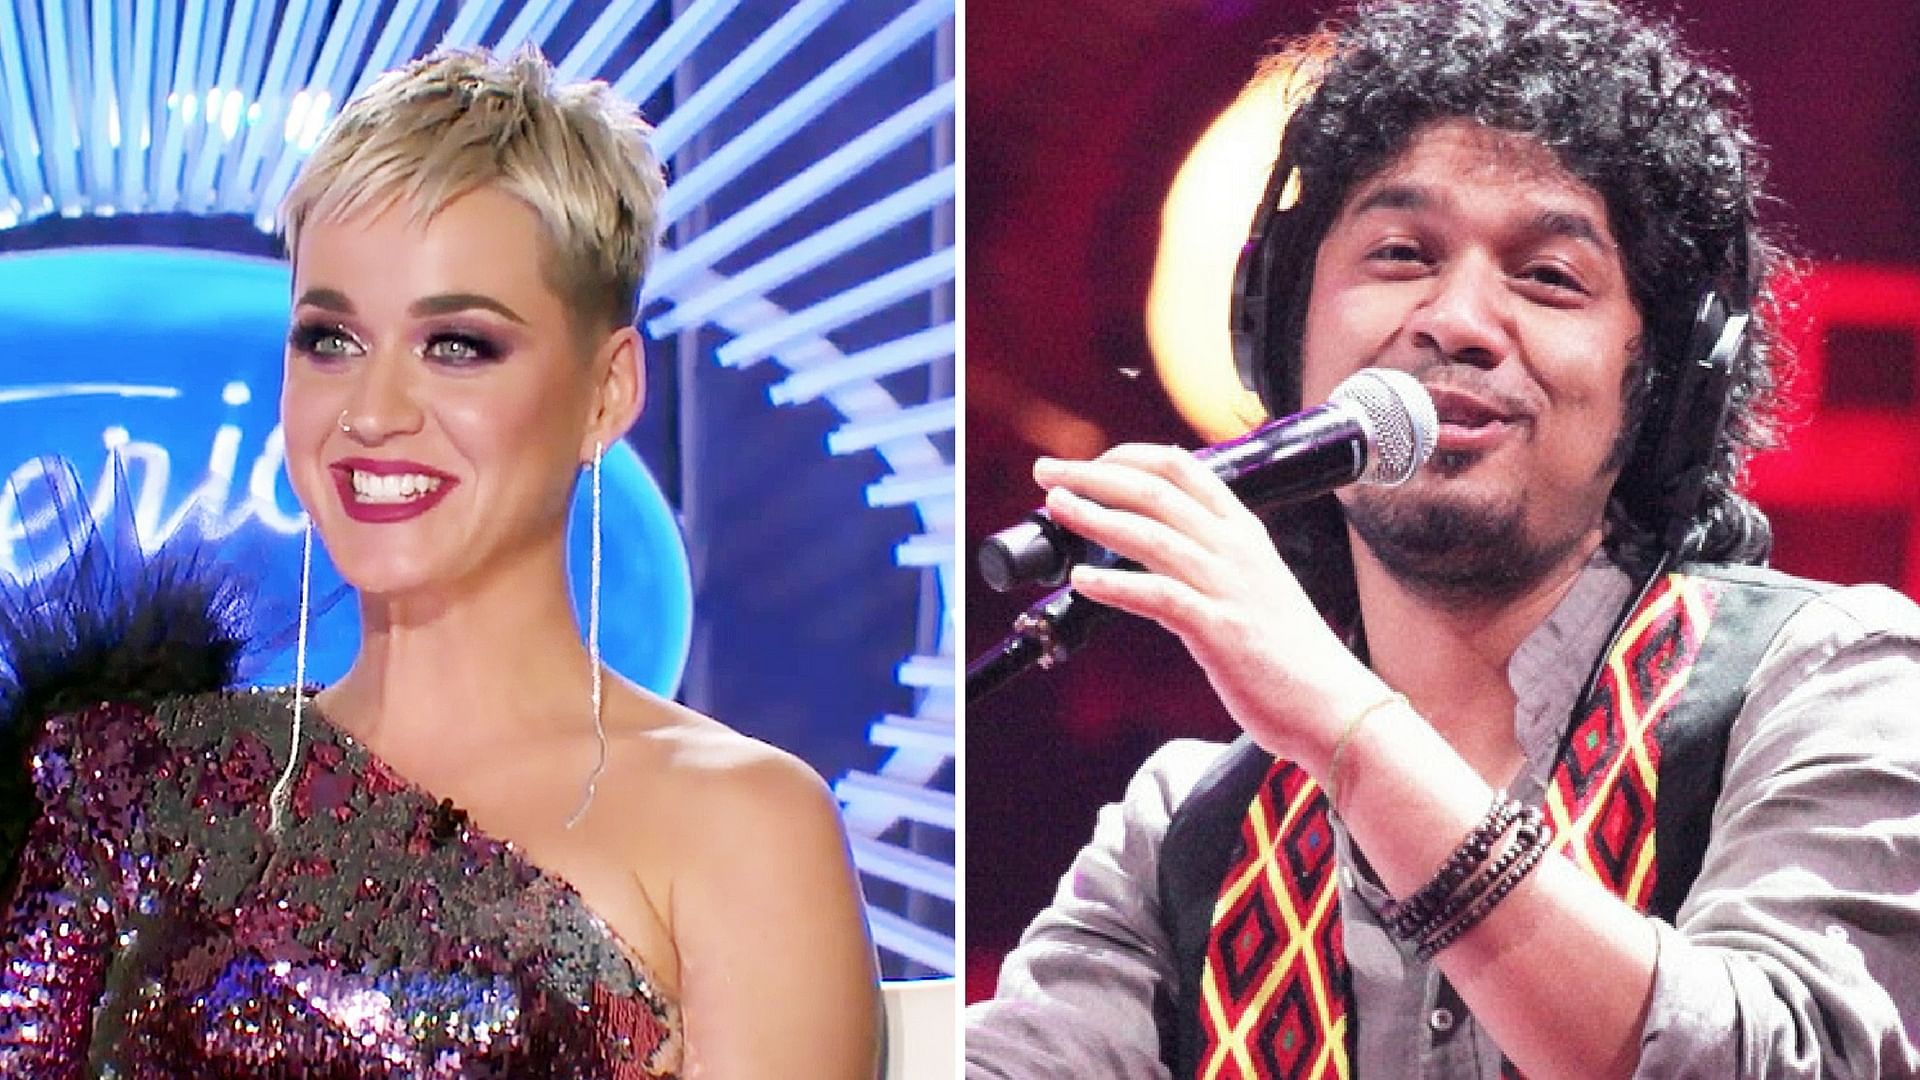 Katy Perry kissed a 19-year-old on <i>American Idol; The Voice India Kids</i> judge Papon kissed a minor in a video shared on his official Facebook page.